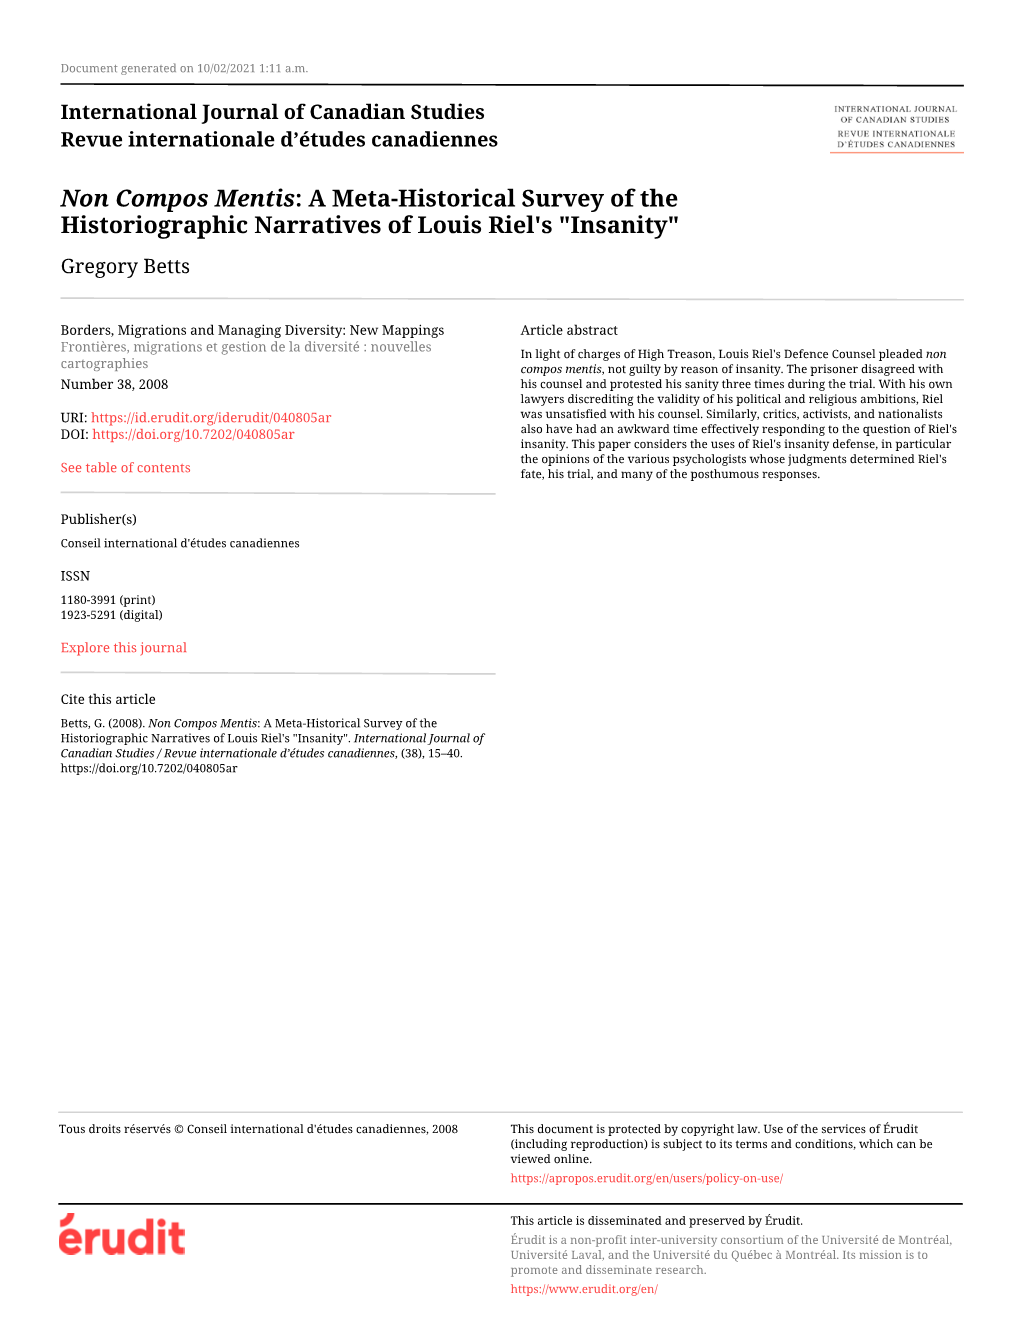 Non Compos Mentis: a Meta-Historical Survey of the Historiographic Narratives of Louis Riel's "Insanity" Gregory Betts